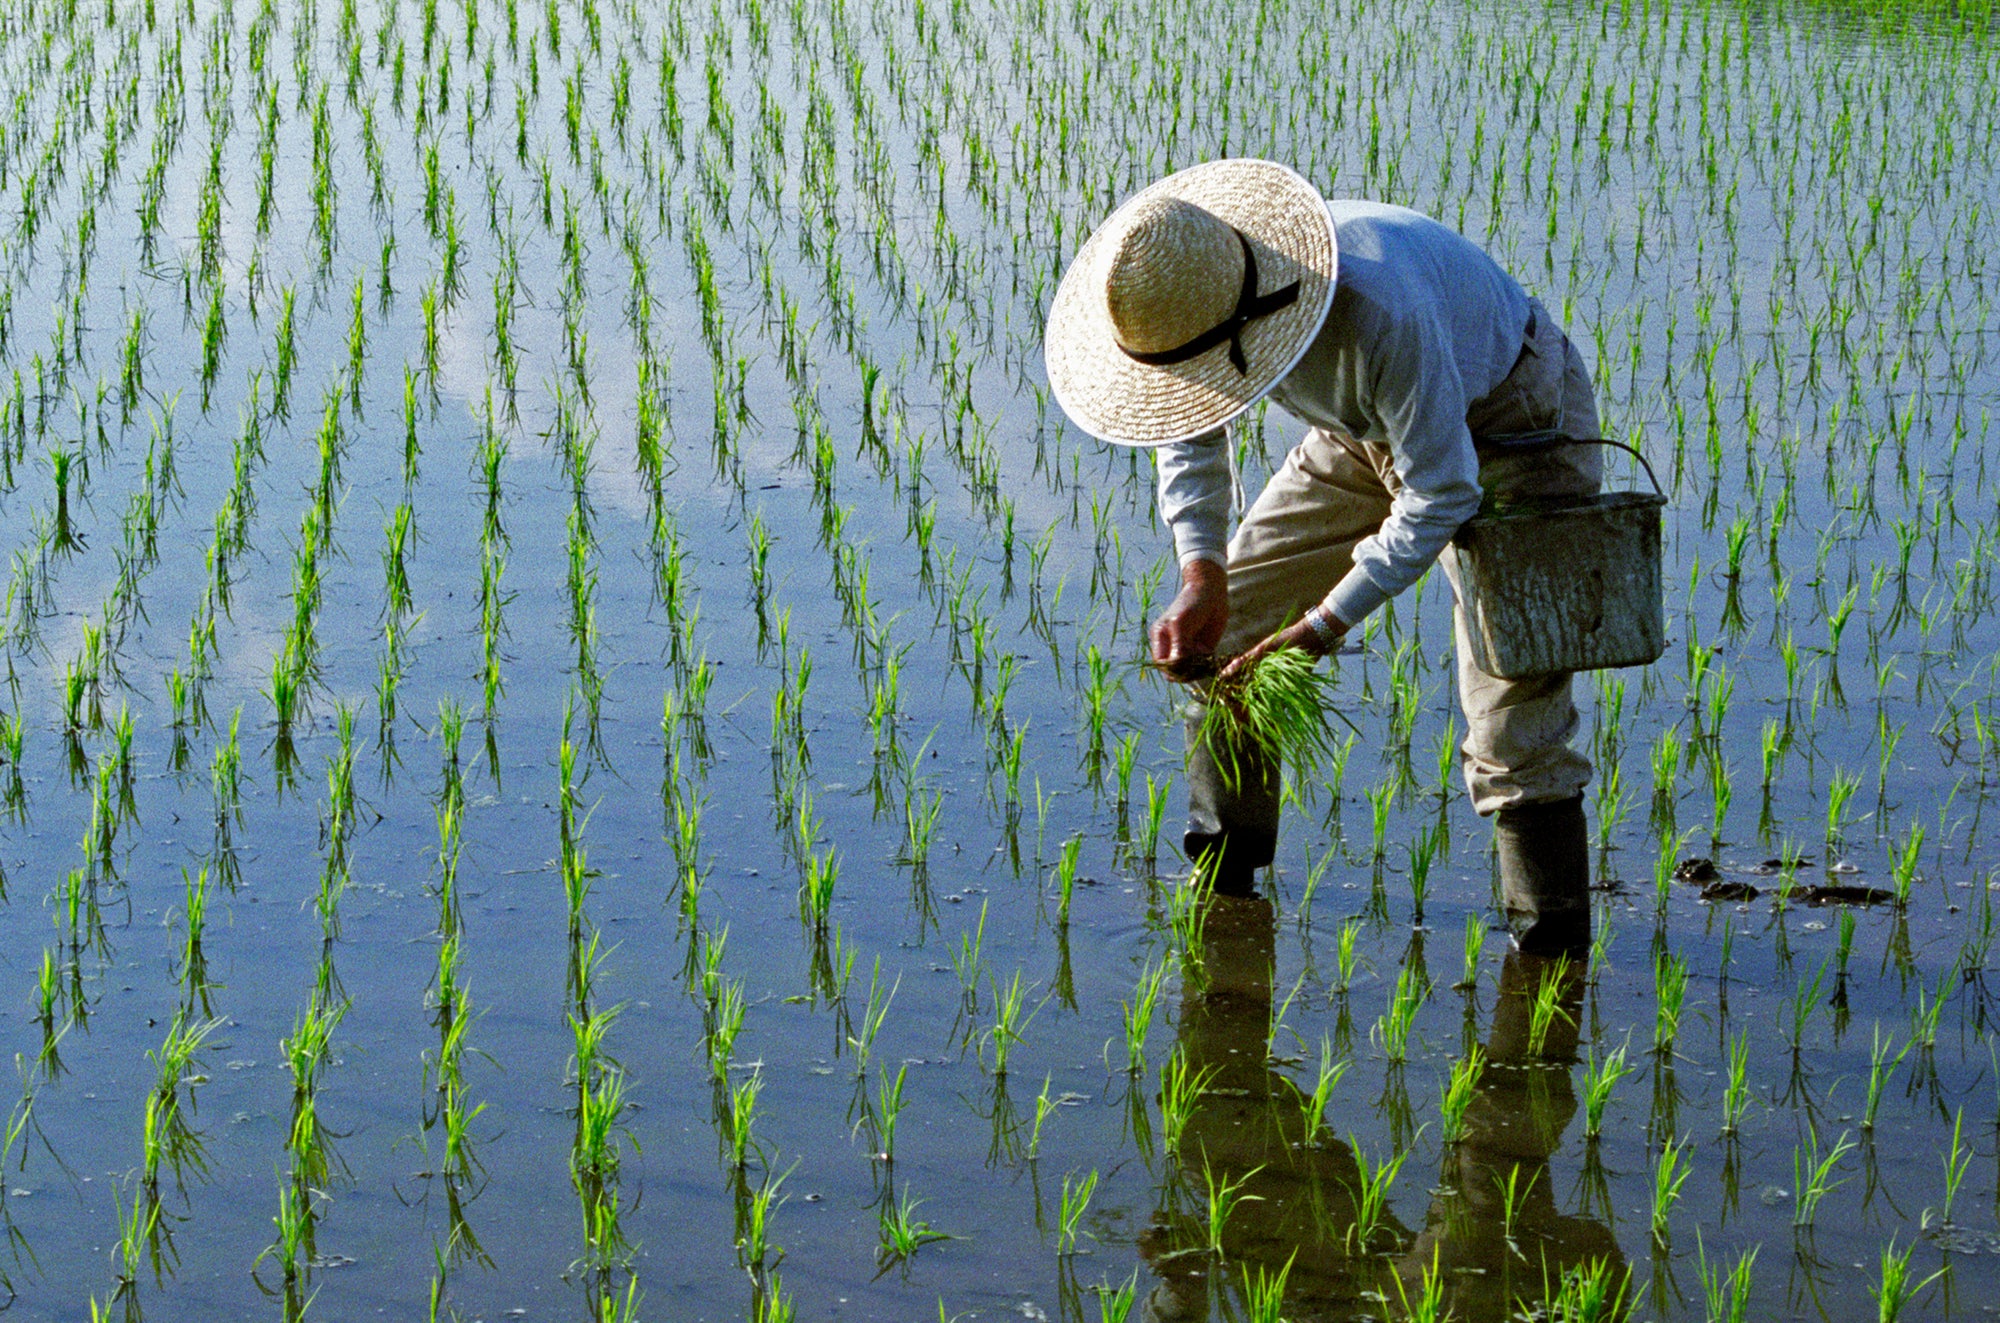 Rice grows in shallow waters away from shade